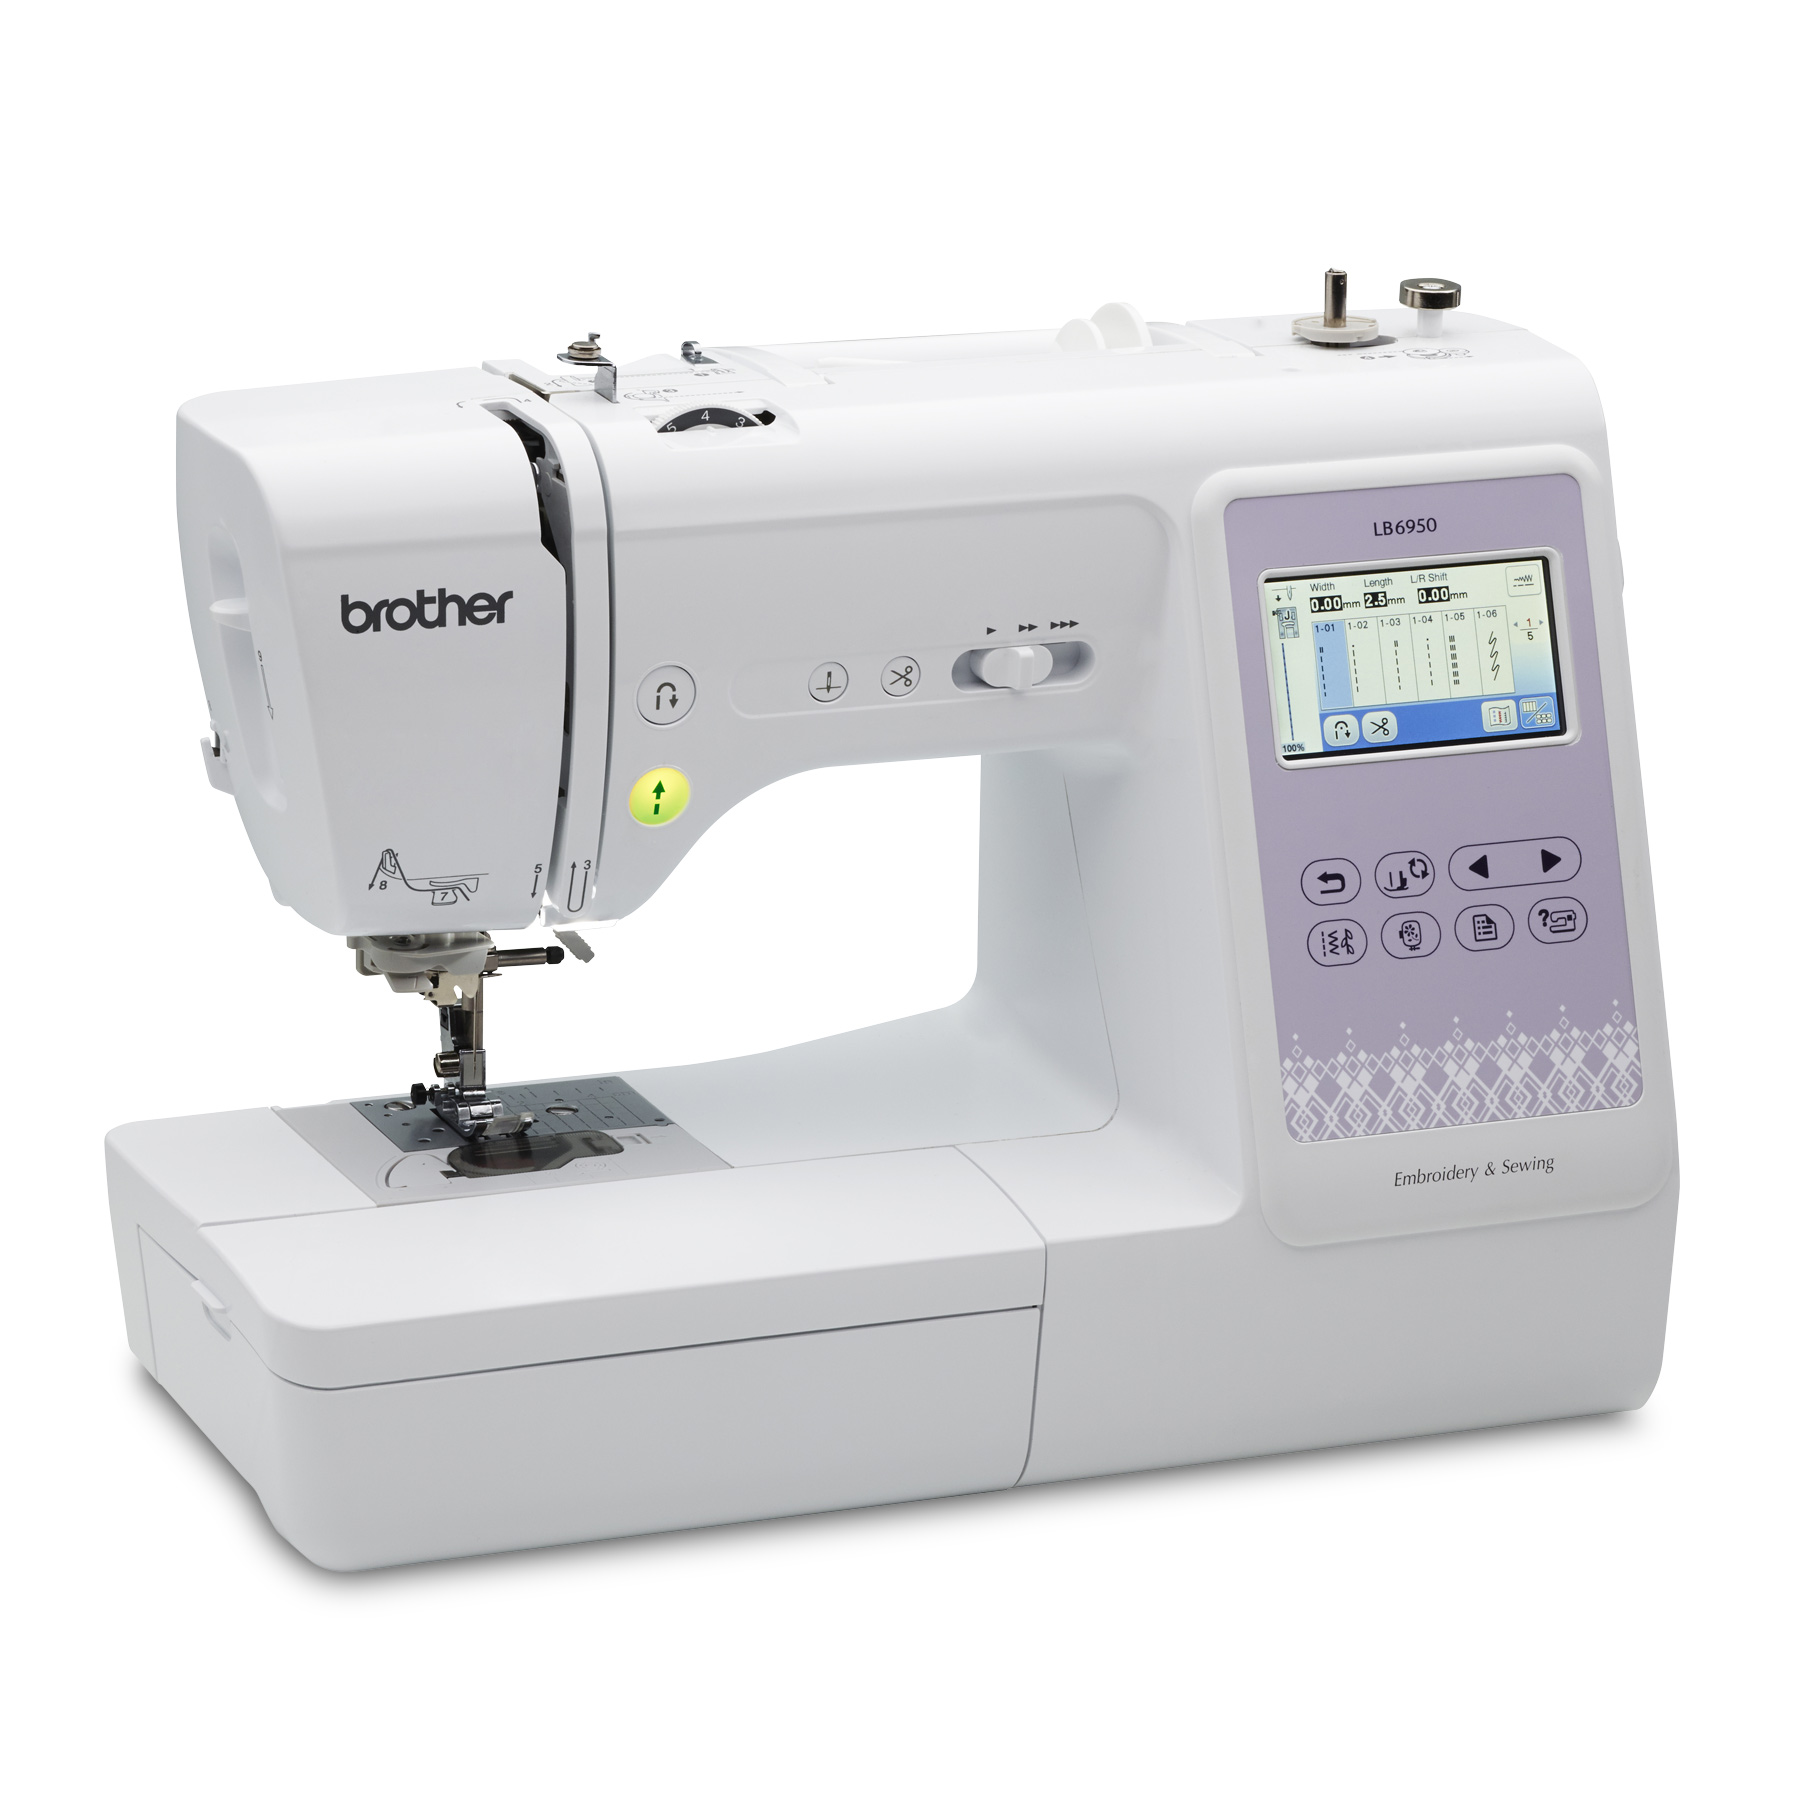  Brother PE900 Embroidery Machine w/Grand Slam Package Includes  64 Embroidery Threads + Prewound Bobbins + More! : אמנות, יצירה ותפירה